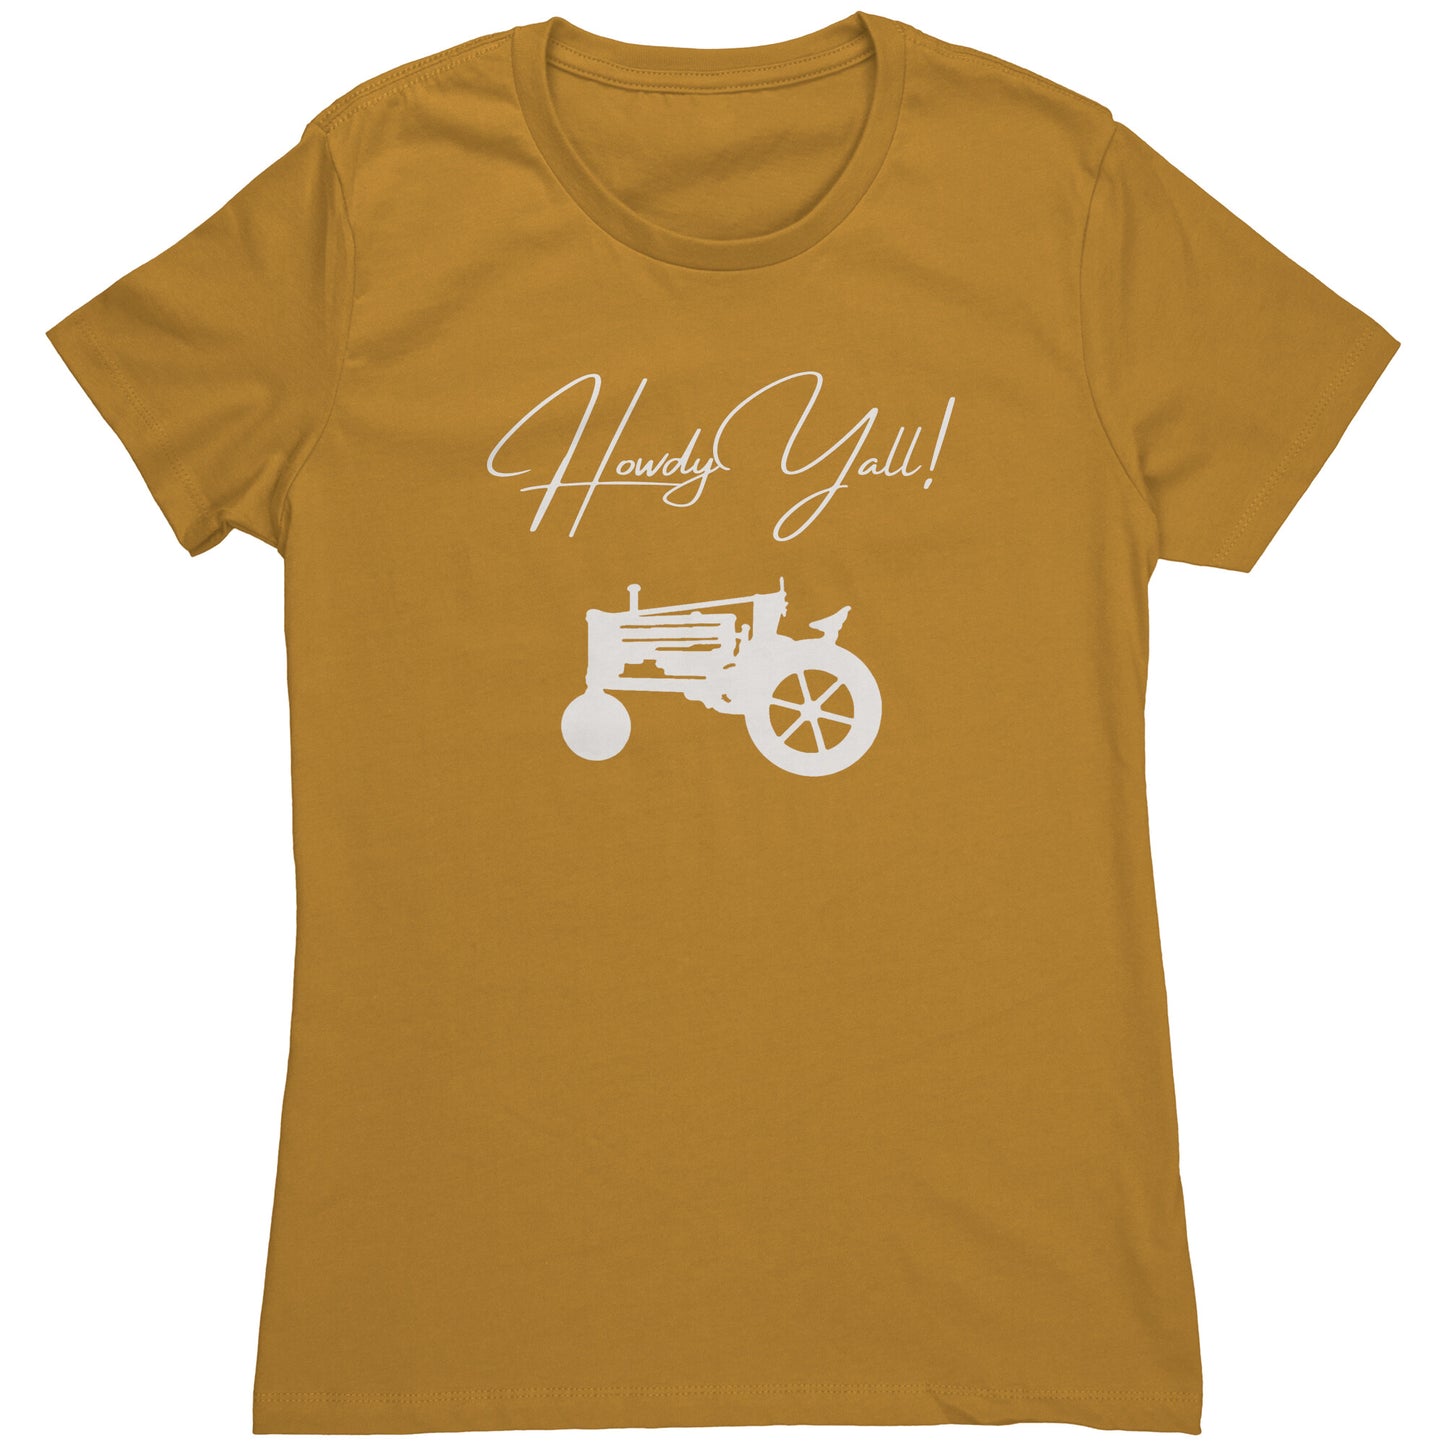 Fun and Cute Farm "Howdy Y'all" Shirt with tractor